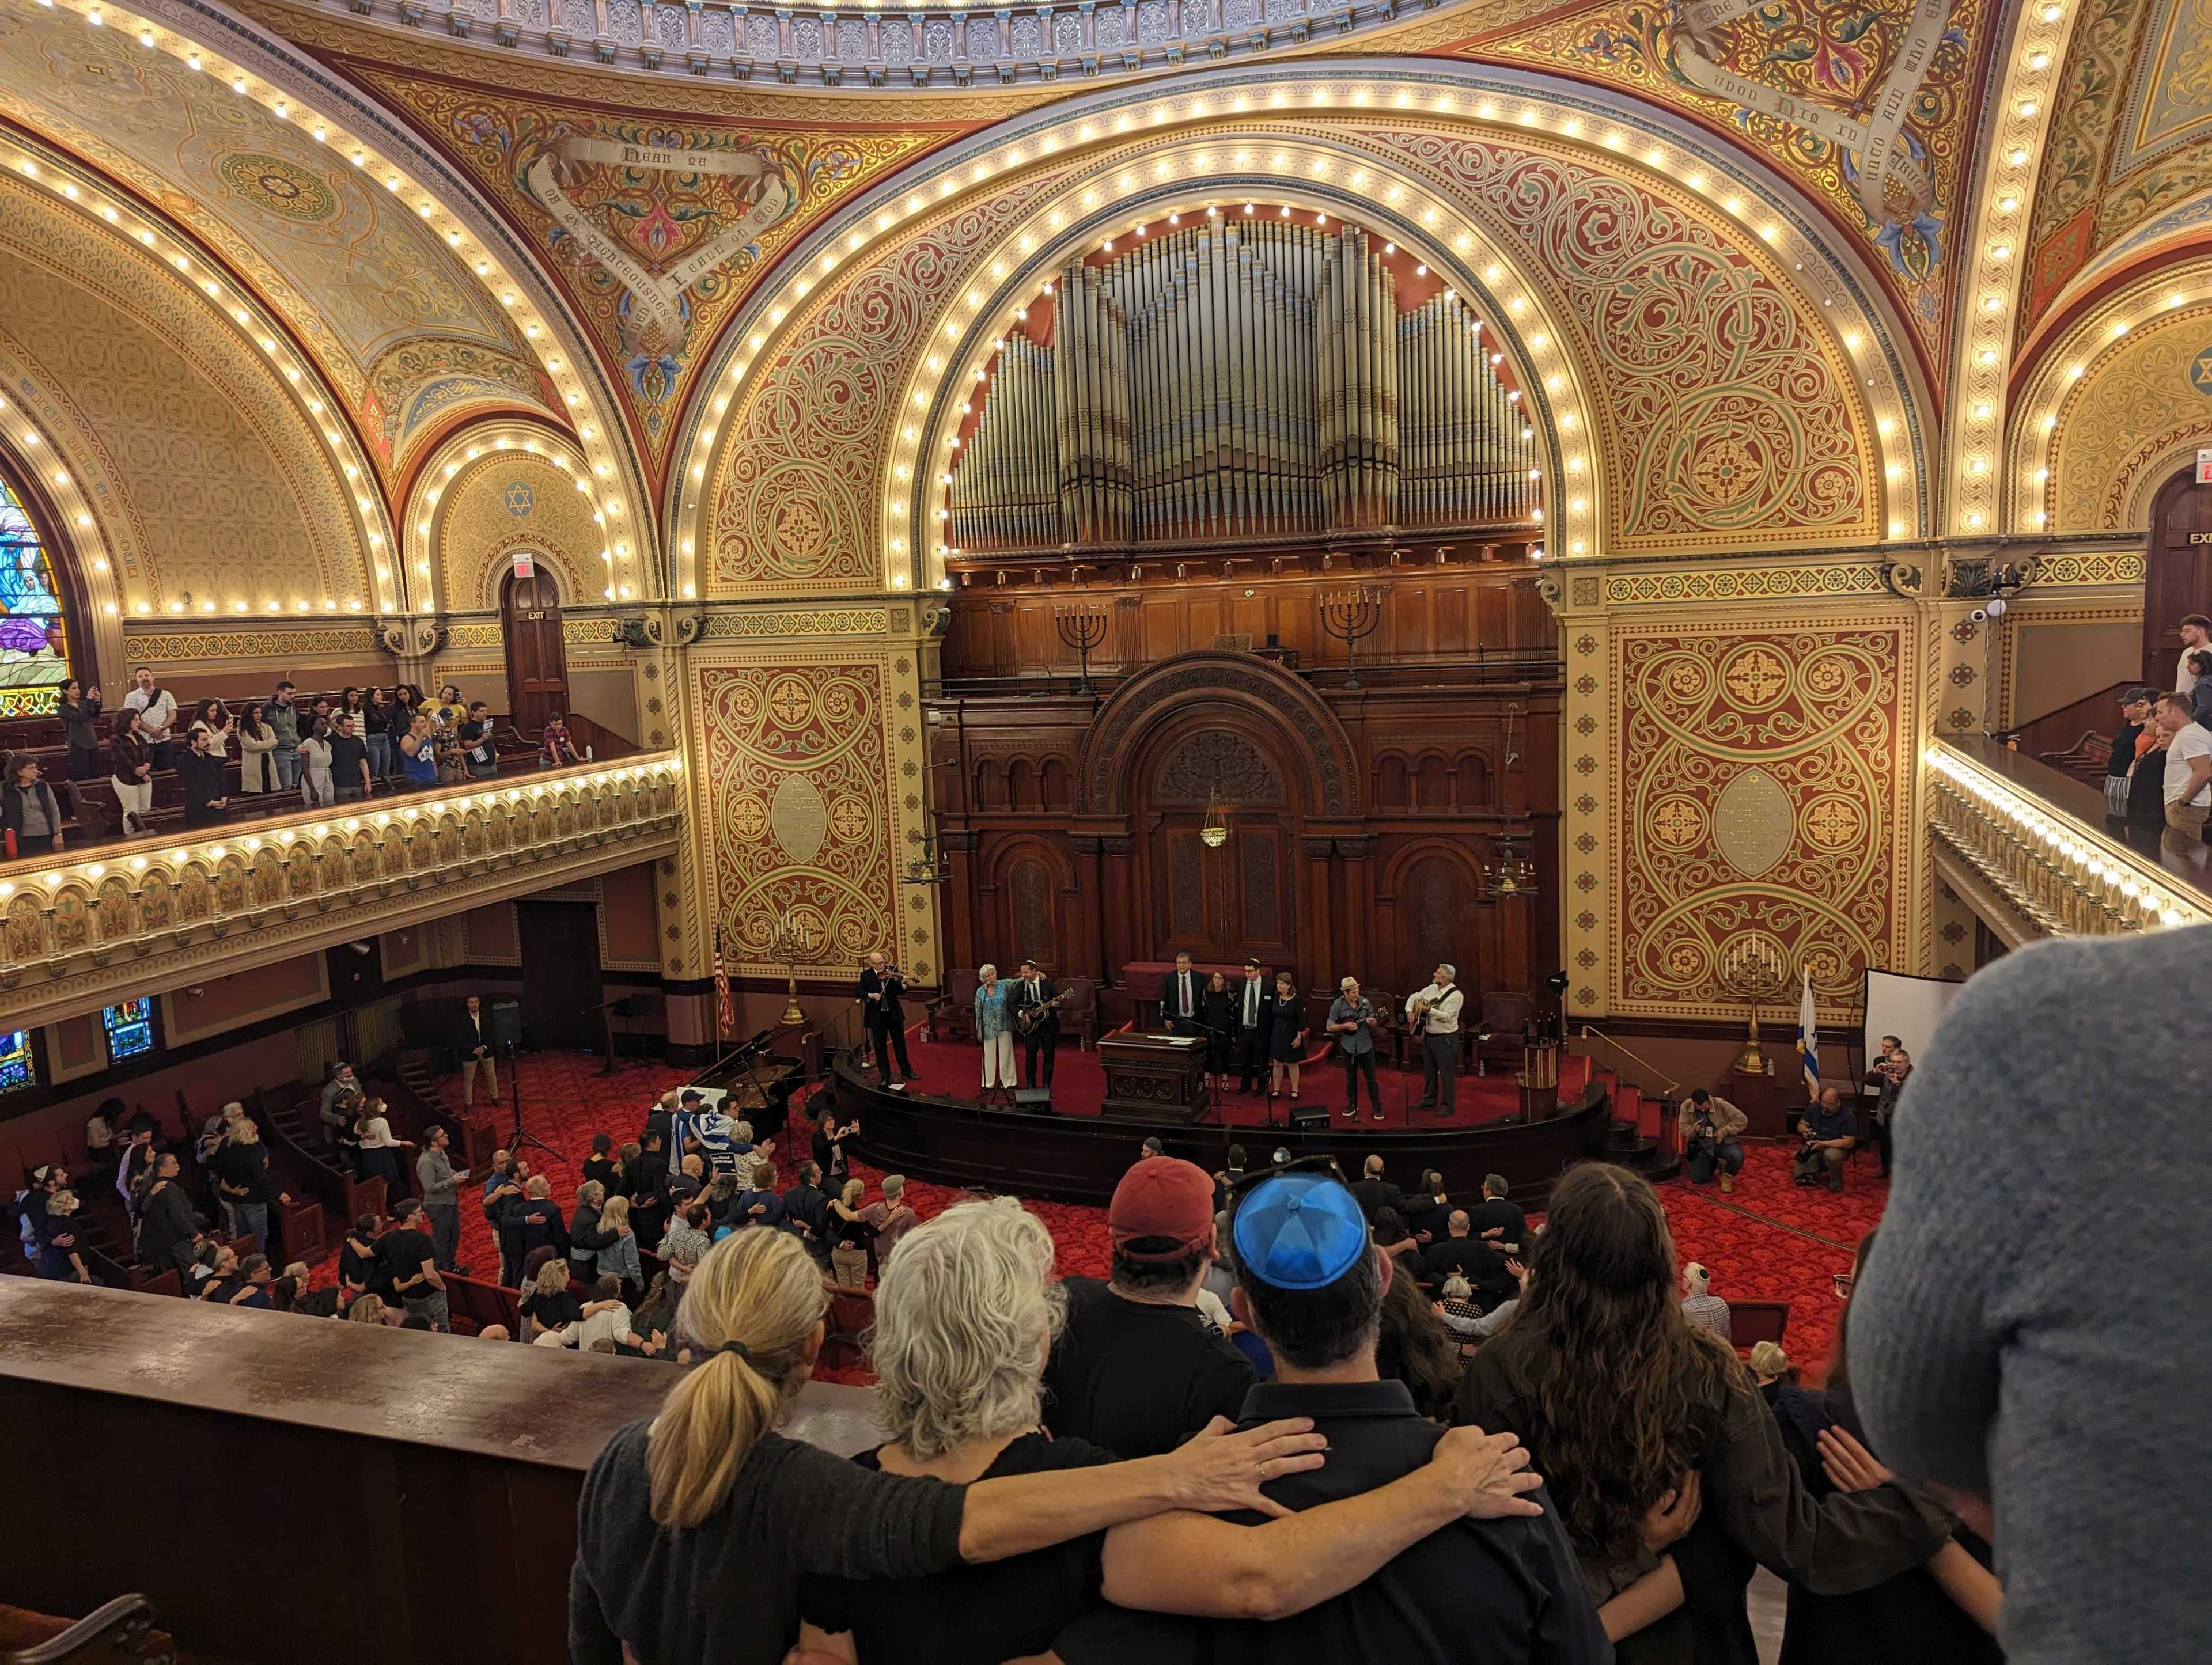 Jewish community members sang and mourned together Sunday at Congregration Sherith Israel in San Francisco.